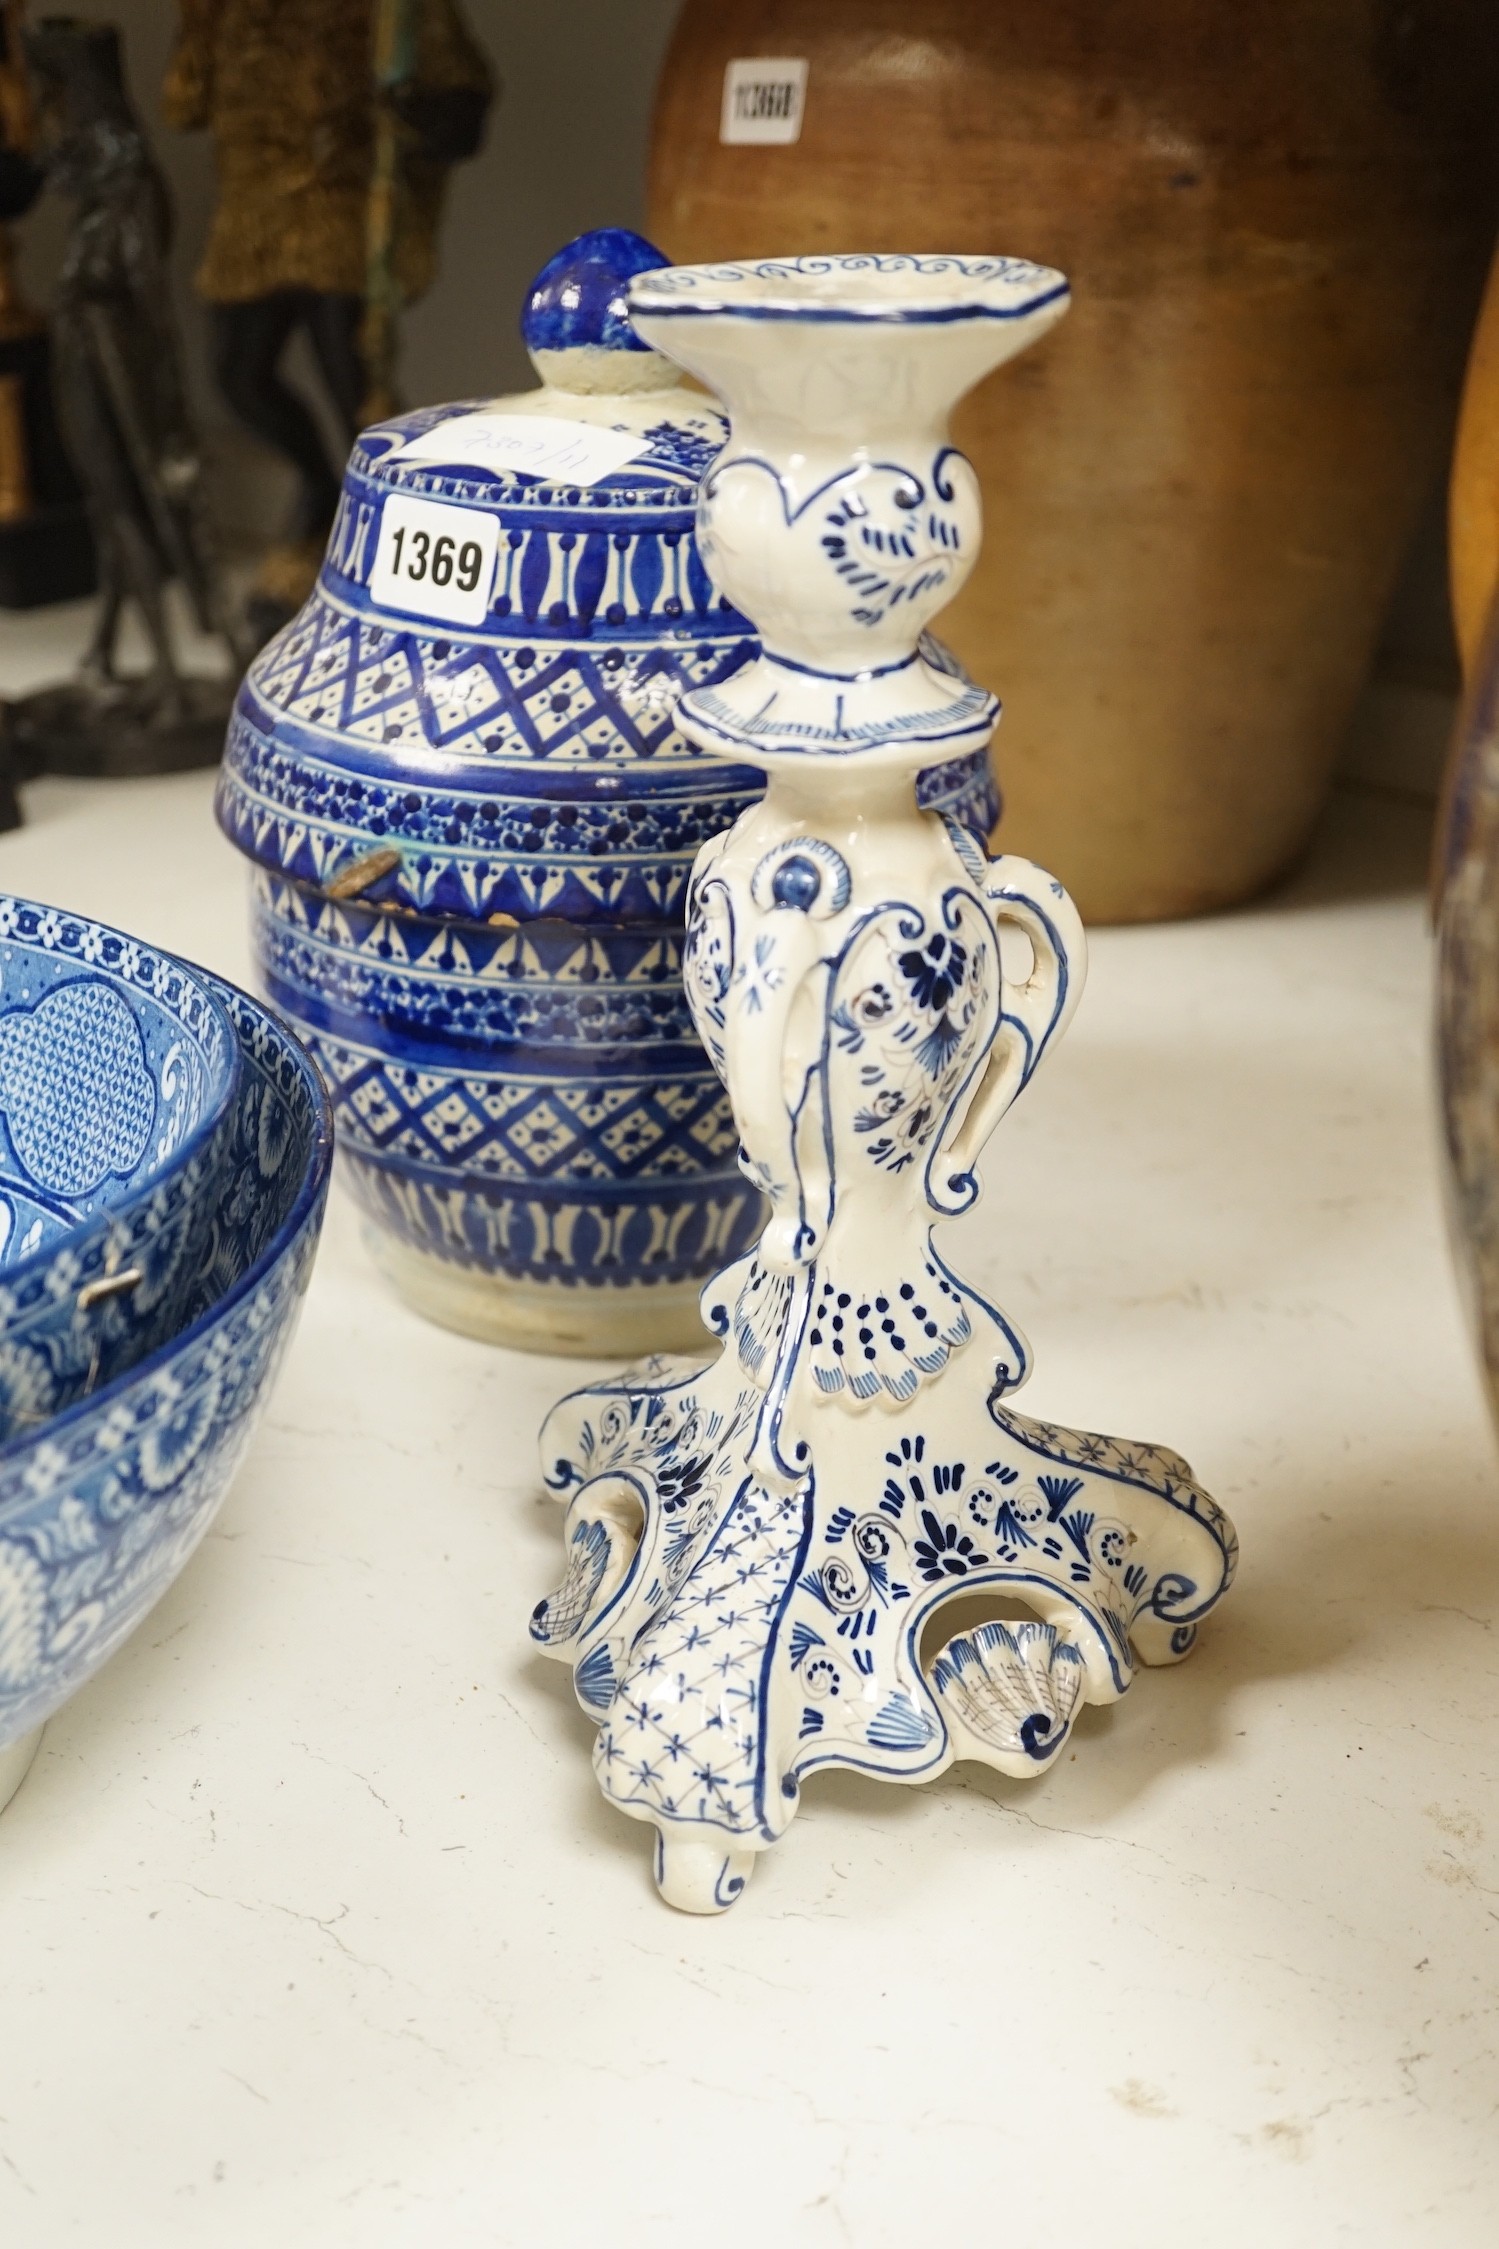 A pair of Delft blue and white candlesticks together with an 18th century Delft bowl, a Moroccan pottery jar with cover, and two pearlware bowls